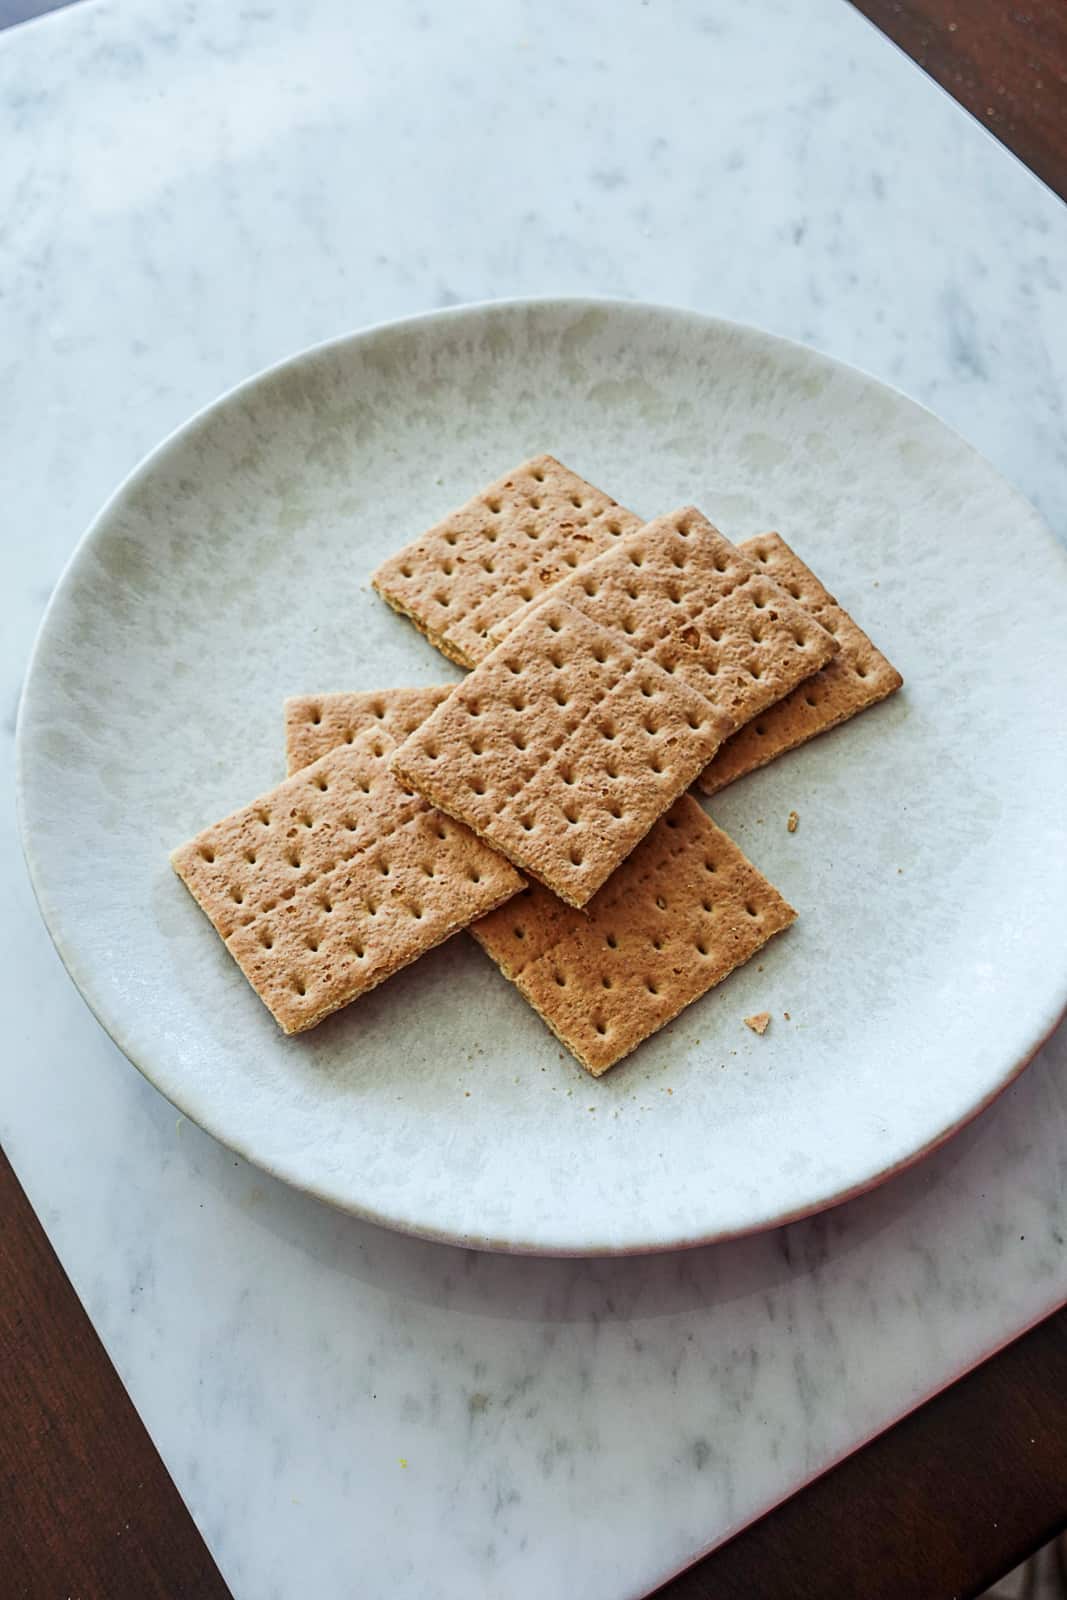 Graham crackers on a plate